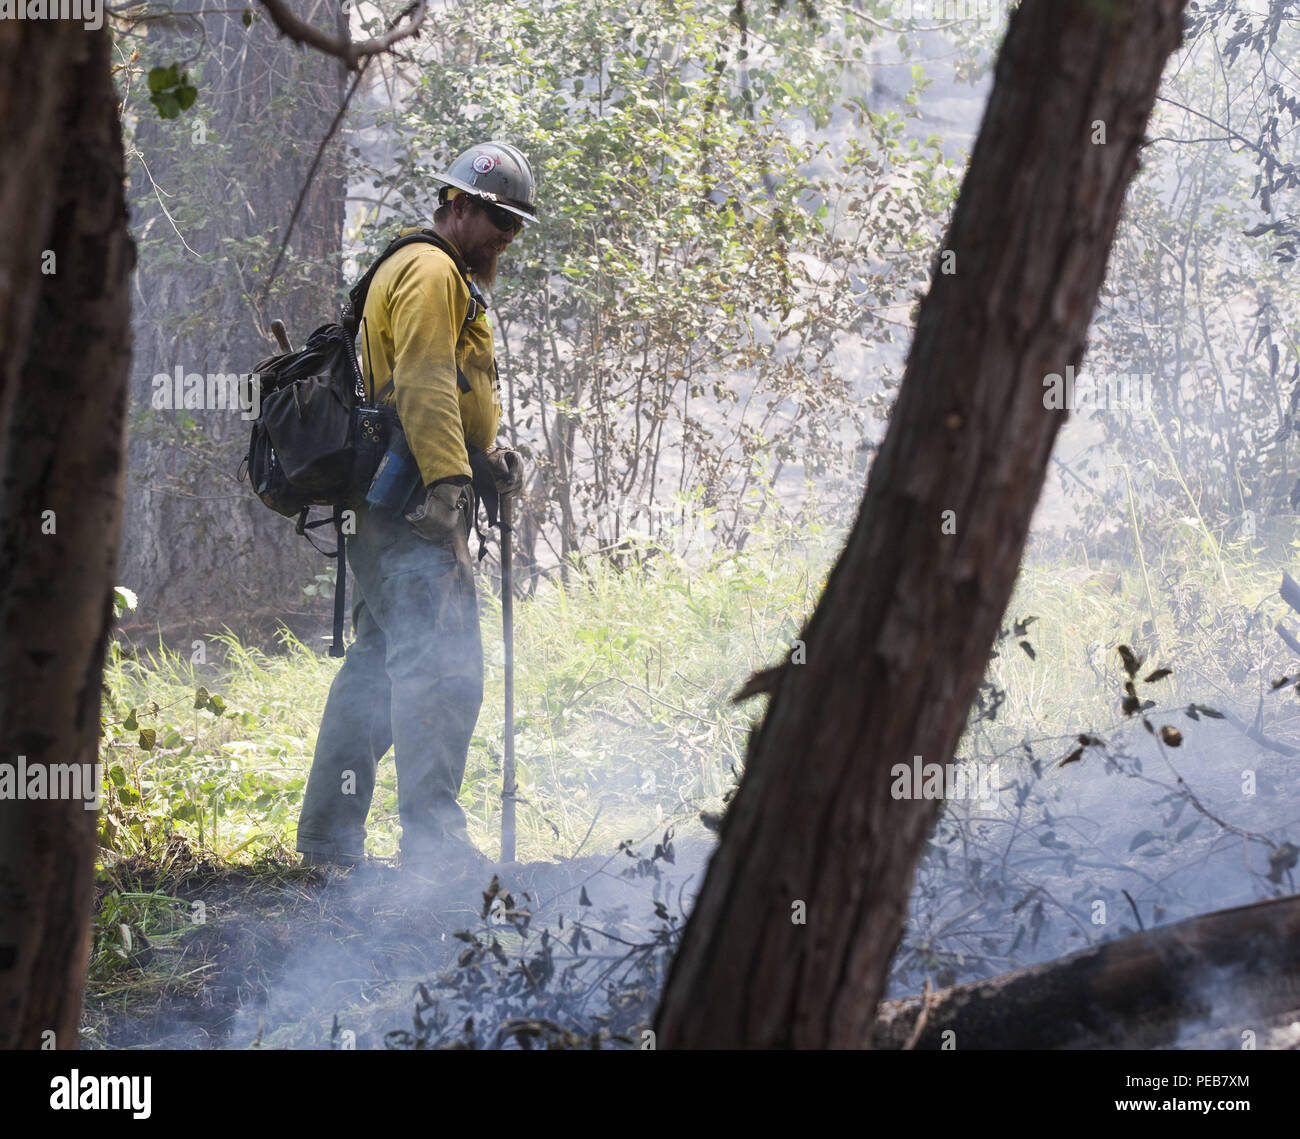 Dardnelle, California, U.S.A. 13th Aug, 2018. A Palomar HotShots firefighter watches a fire line that his crew just build near Kennedy Meadows. The Donnell Fire in Tuolumne County continues to grown and has reached 28,302 acres according to the U.S. Forest Service as of Monday Aug. 13, 2018. As of Monday morning 54 structures have been destroyed and 220 are stilled threatened. Credit: Marty Bicek/ZUMA Wire/Alamy Live News Stock Photo